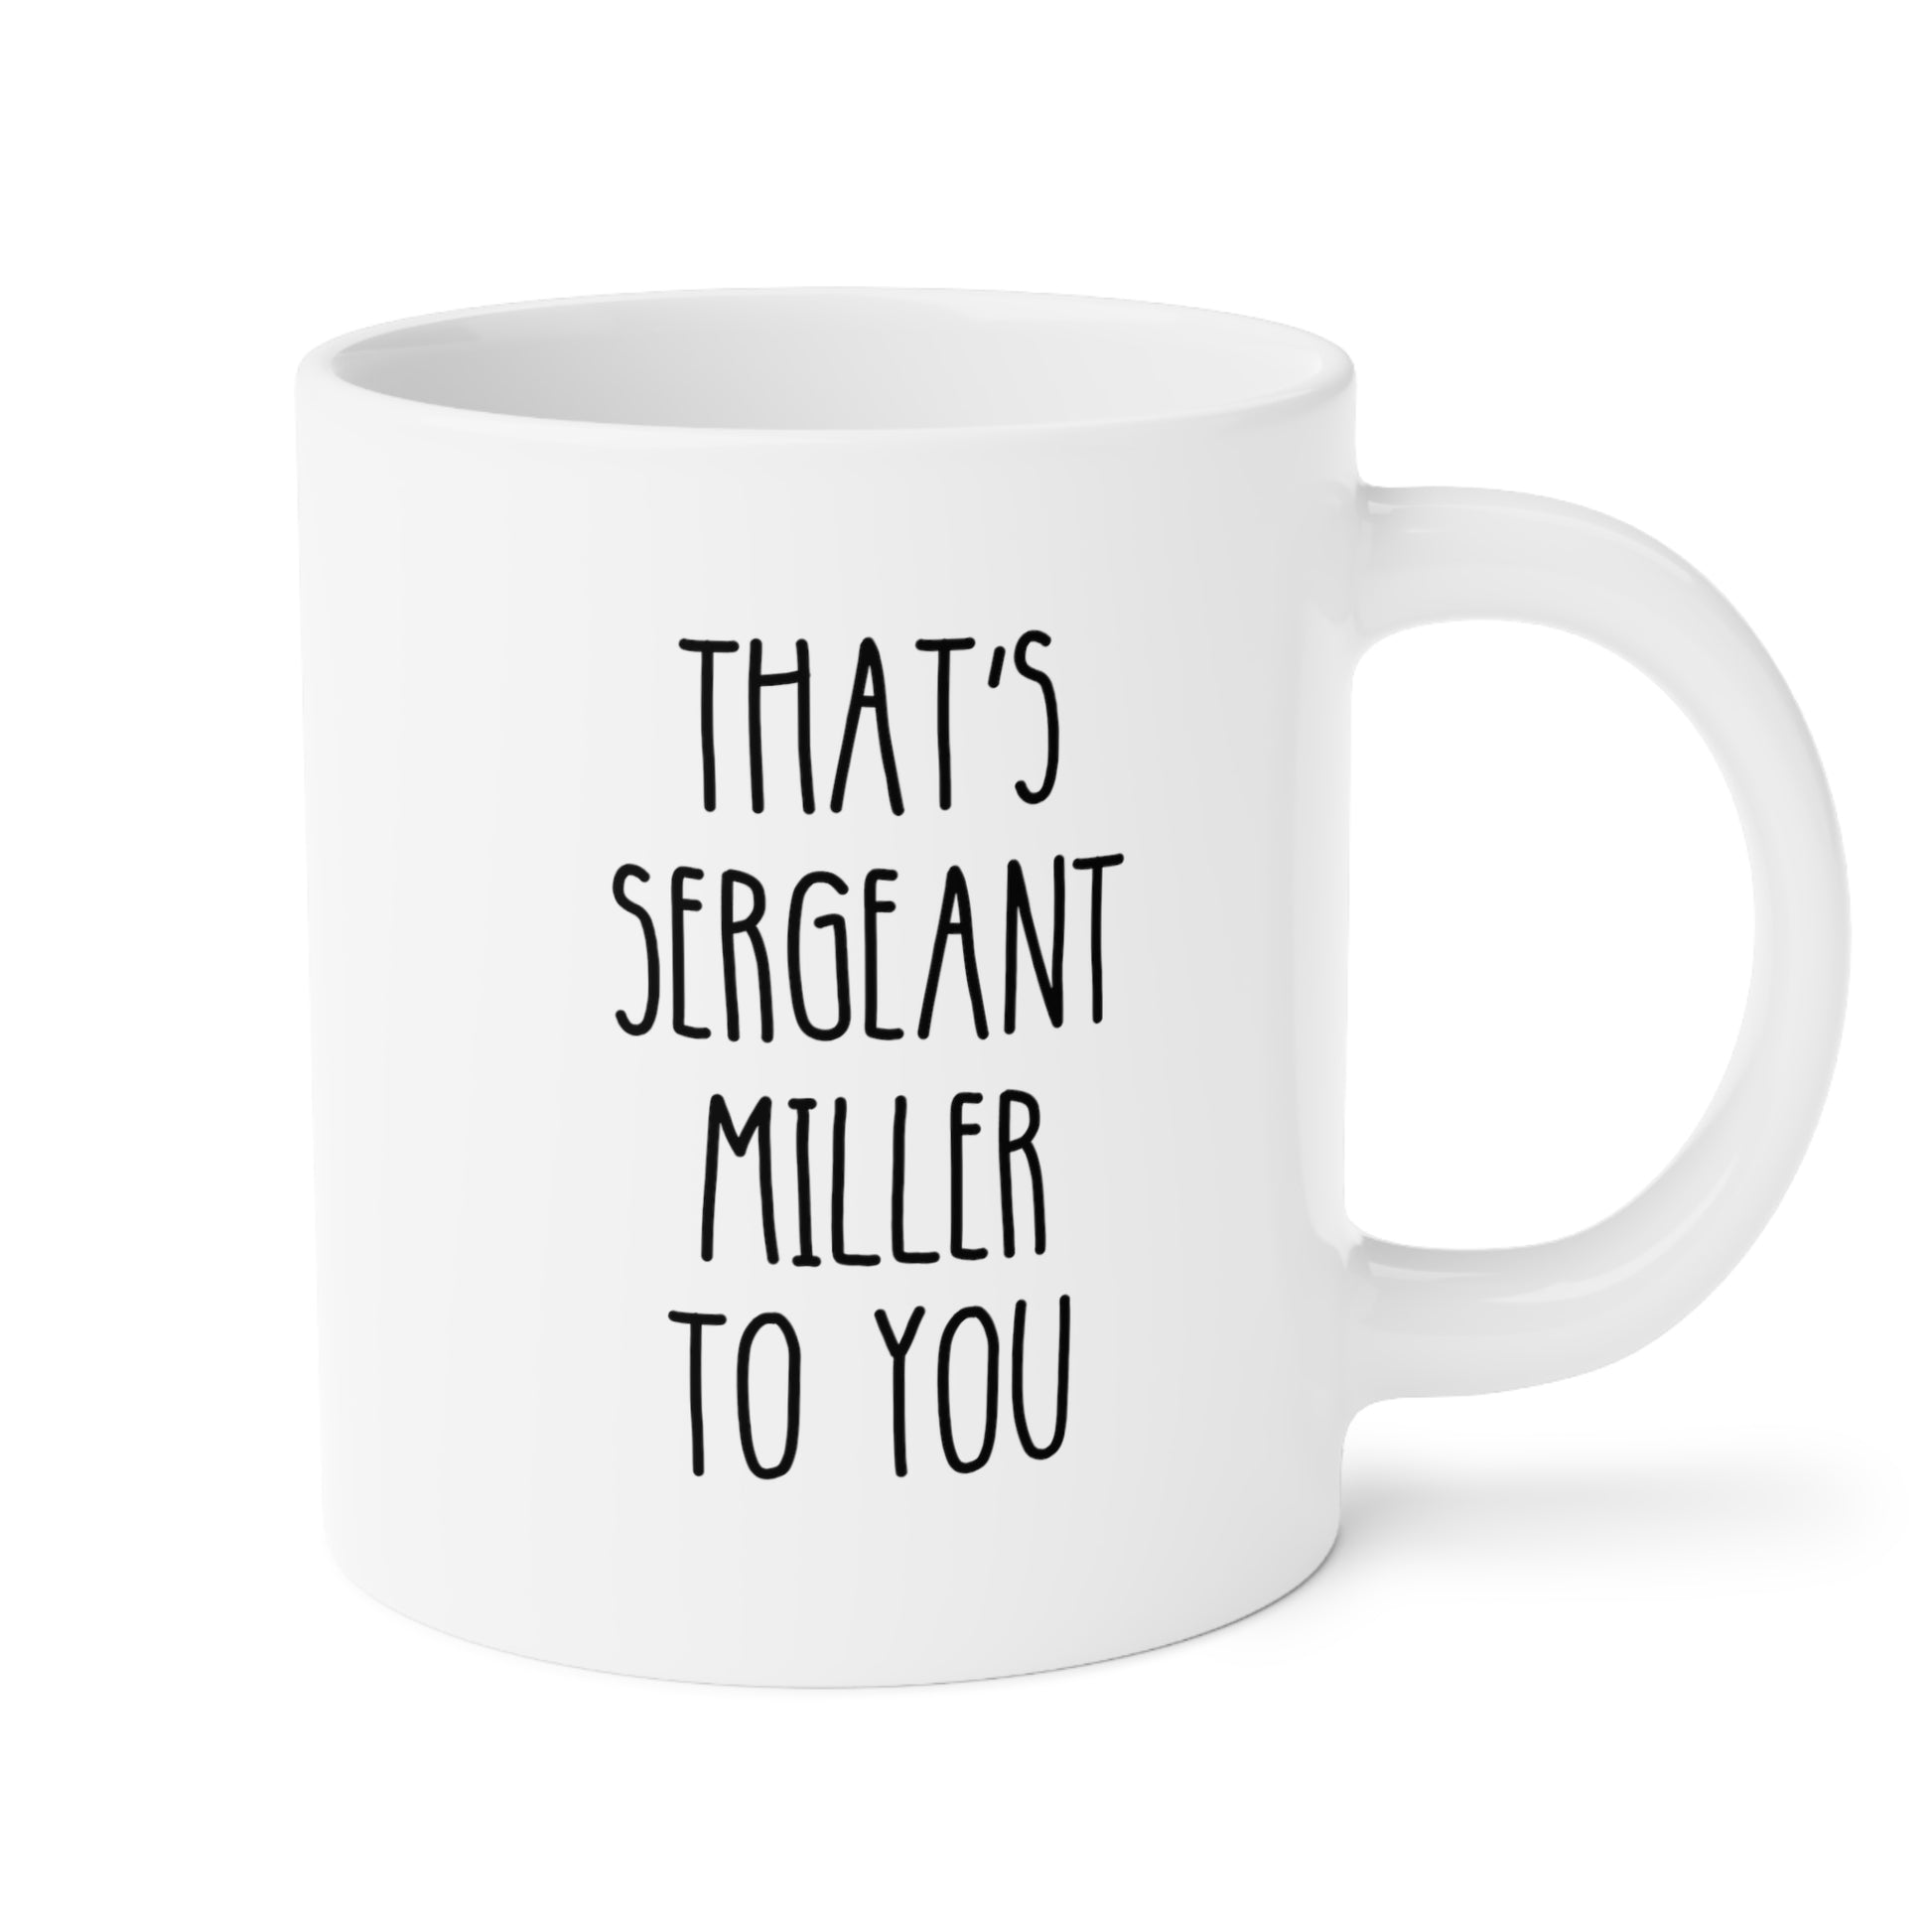 Thats Sergeant Miller To You 20oz white funny large coffee mug gift for sergeant cop police promotion appreciation gift waveywares wavey wares wavywares wavy wares